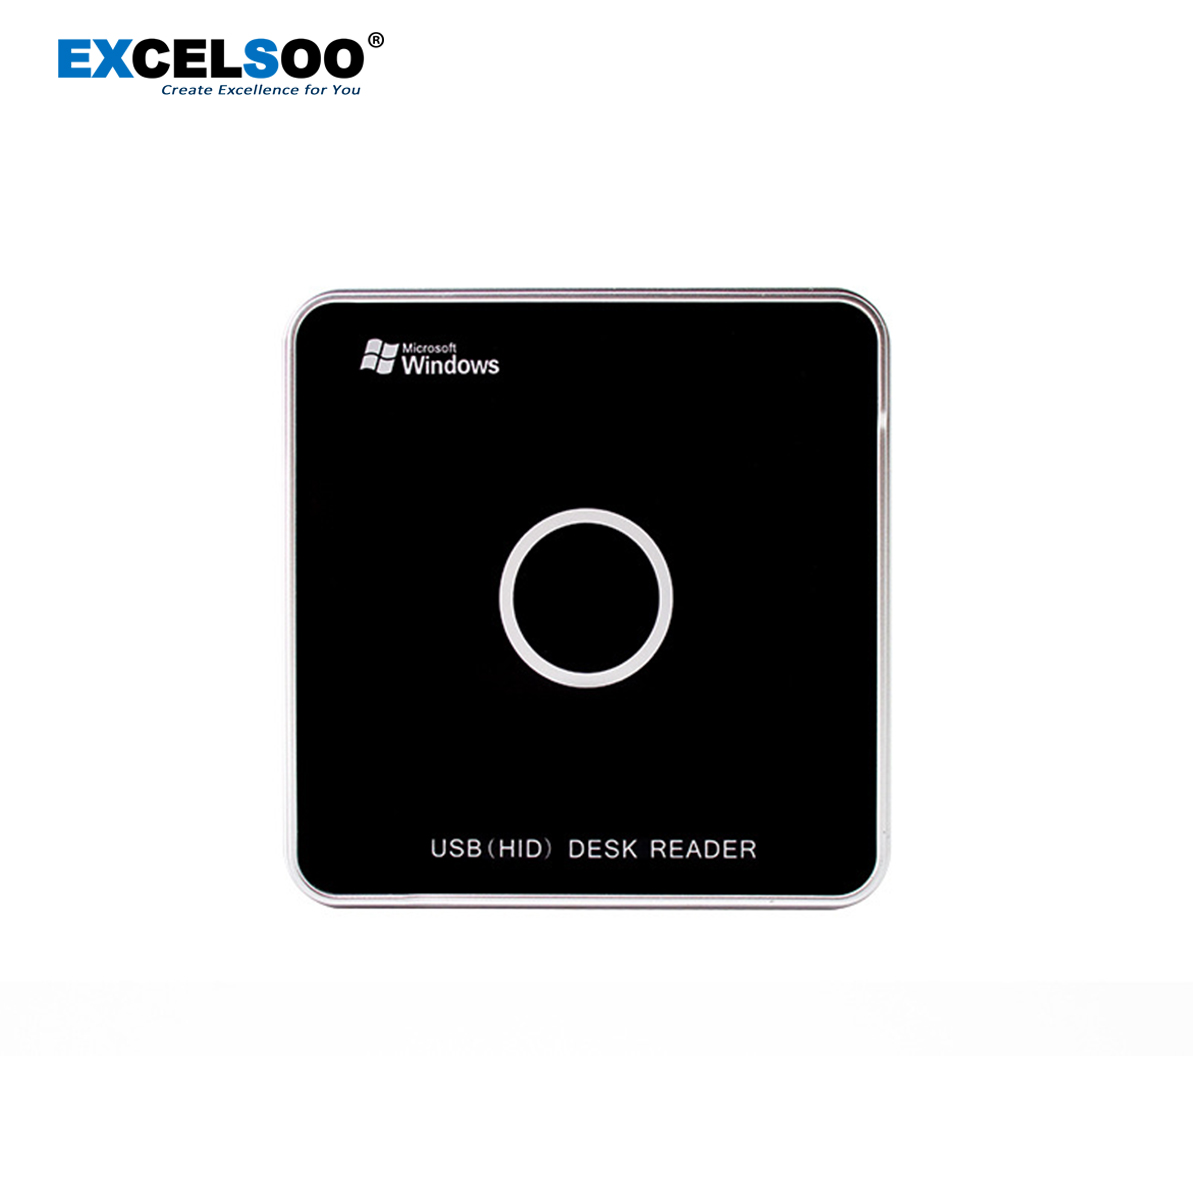 Excelsoo Long Range UHF Card Tags USB Manage Readers XR-400